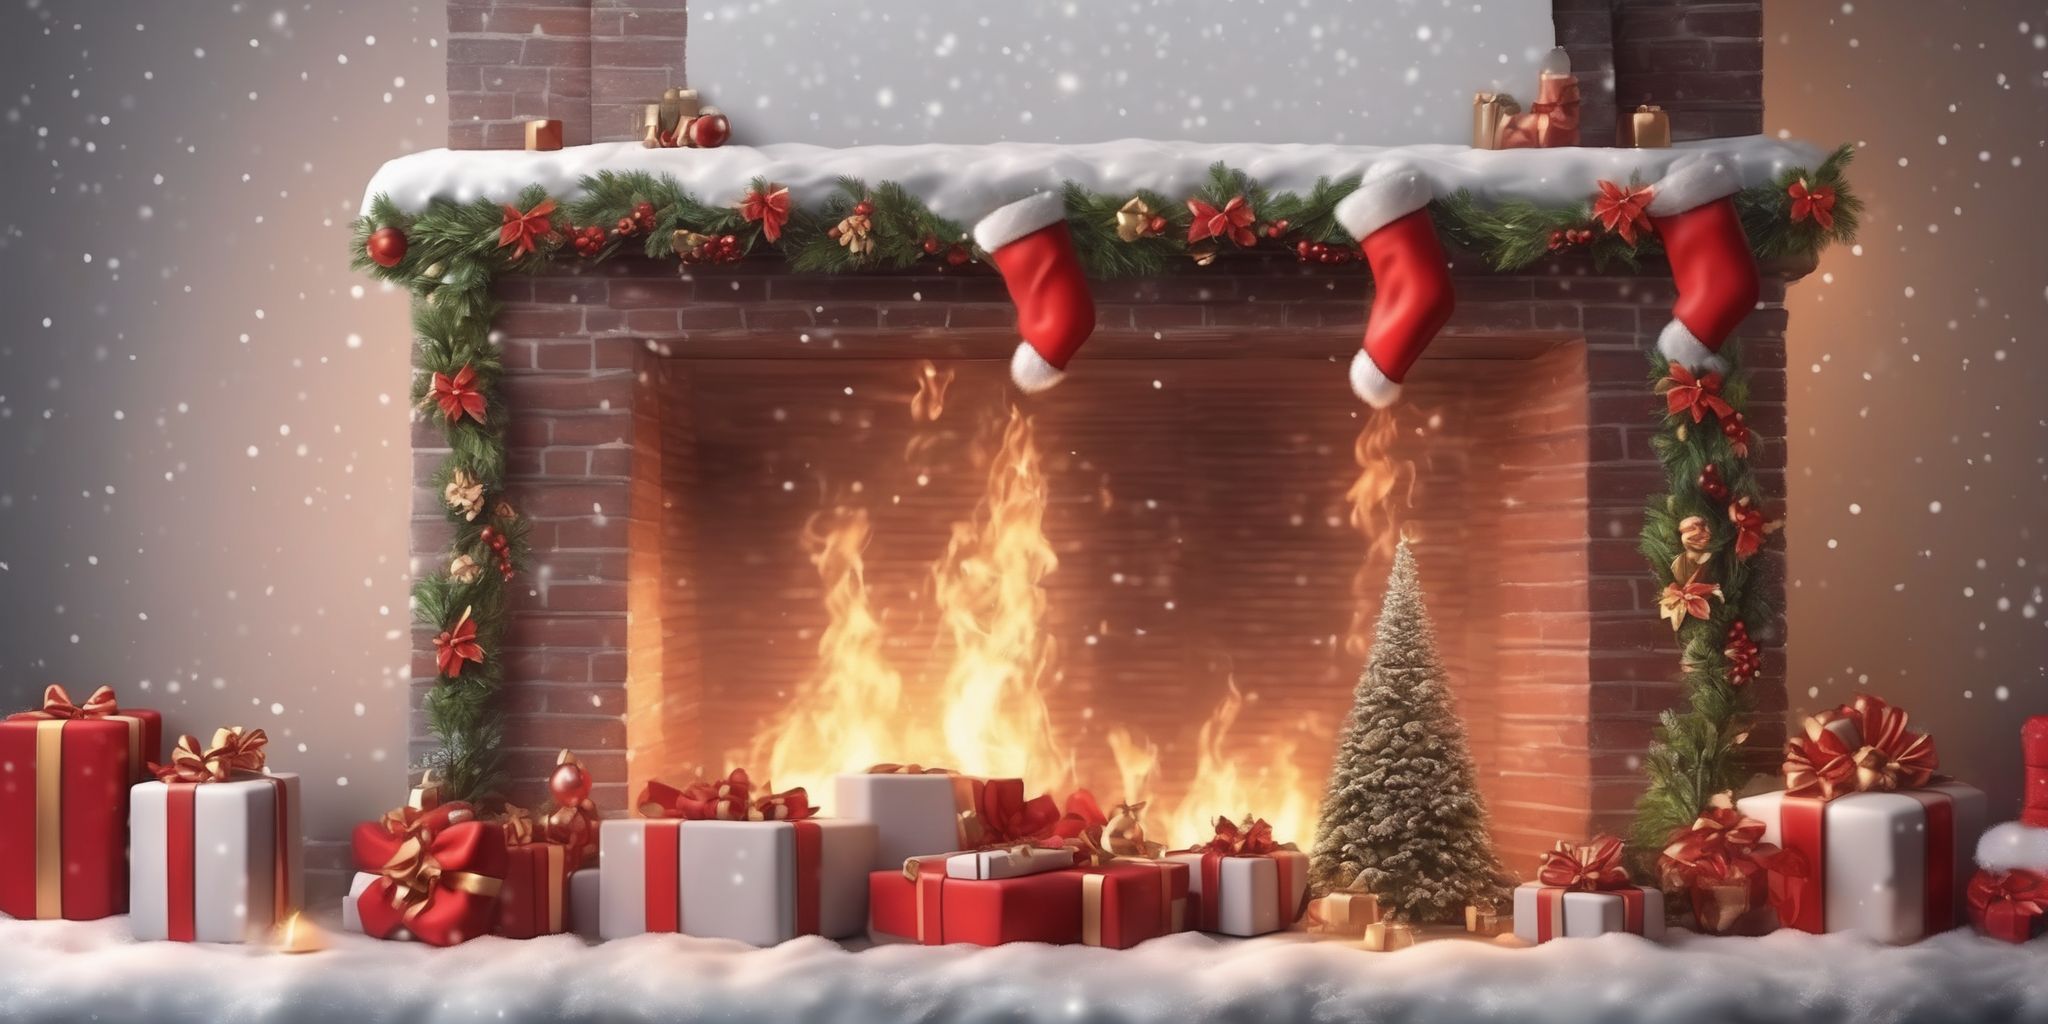 Chimney in realistic Christmas style